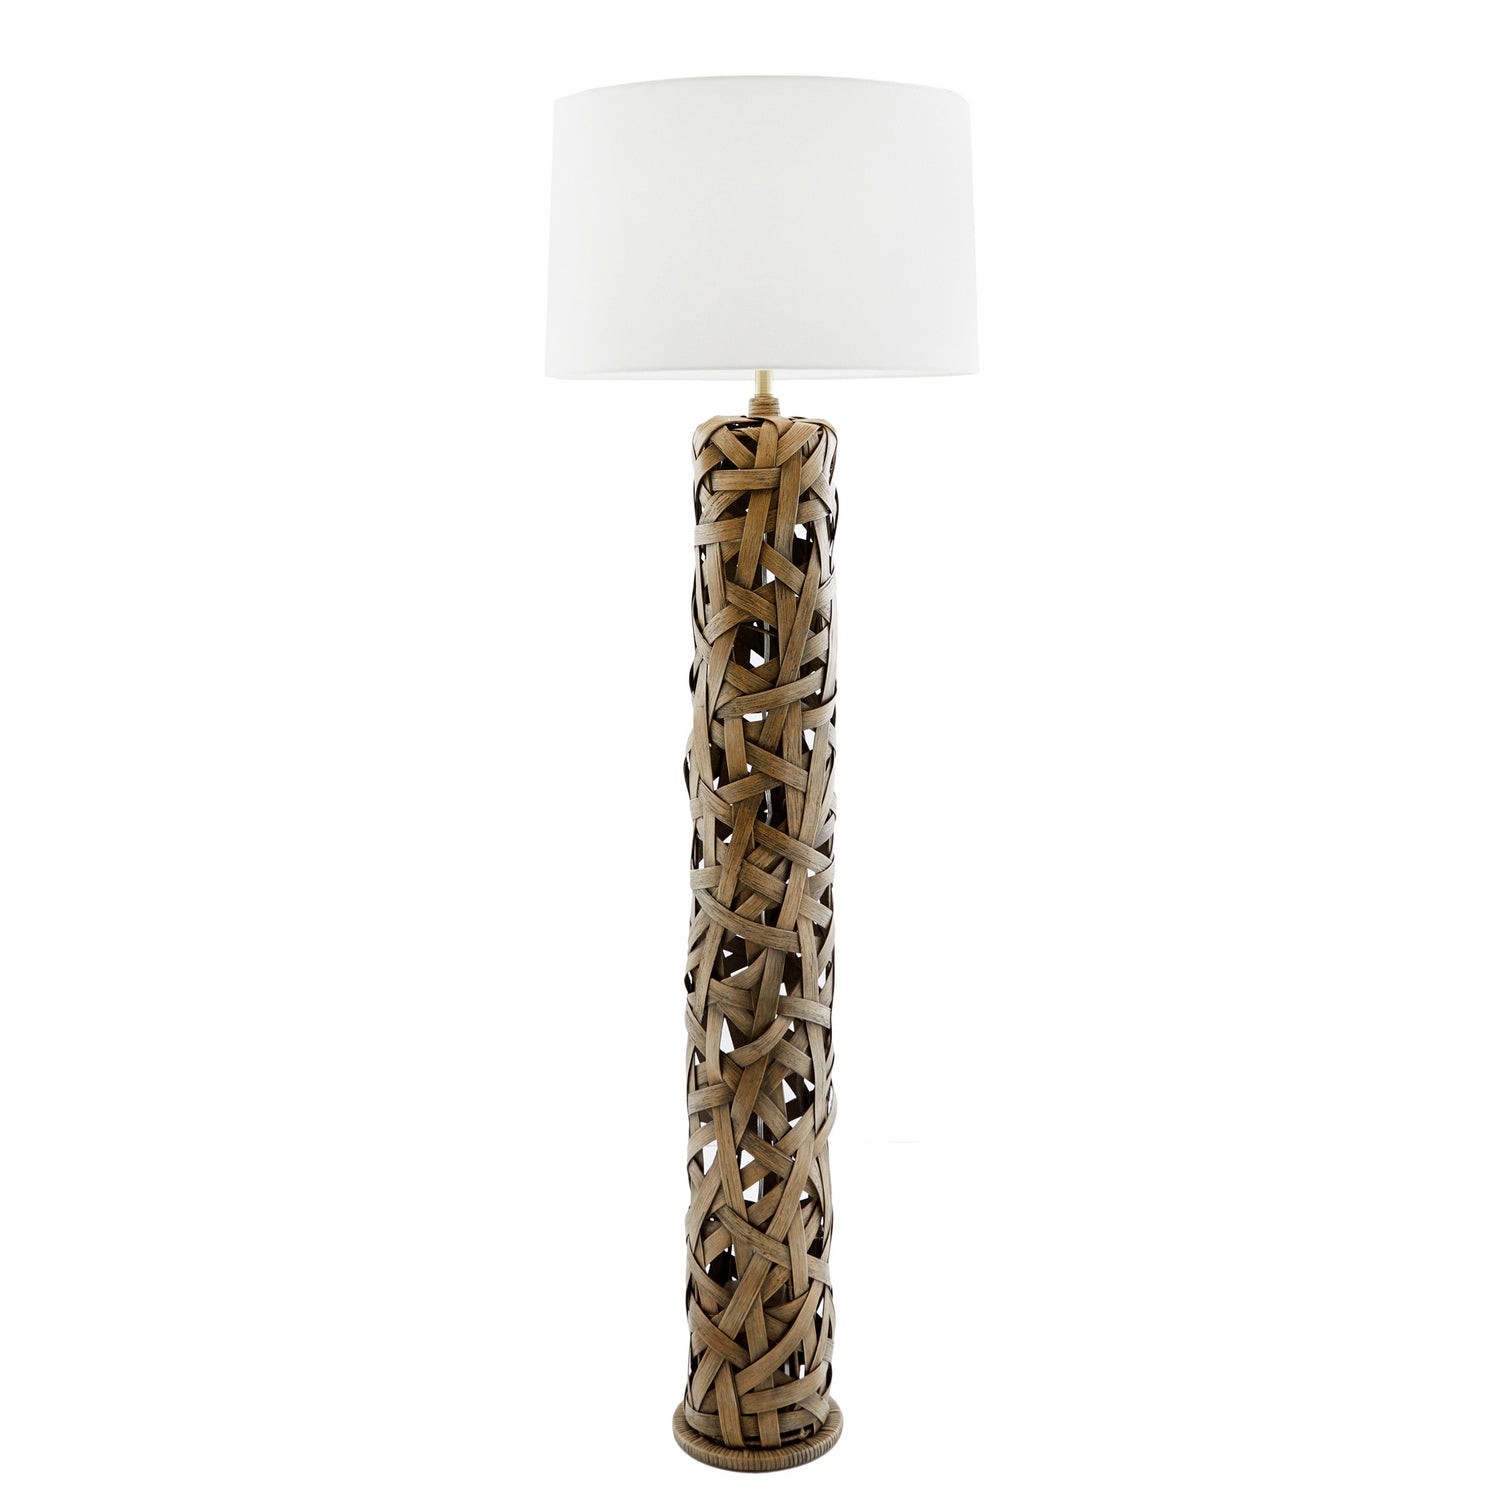 One Light Floor Lamp from the Horatio collection in Palm Gray finish